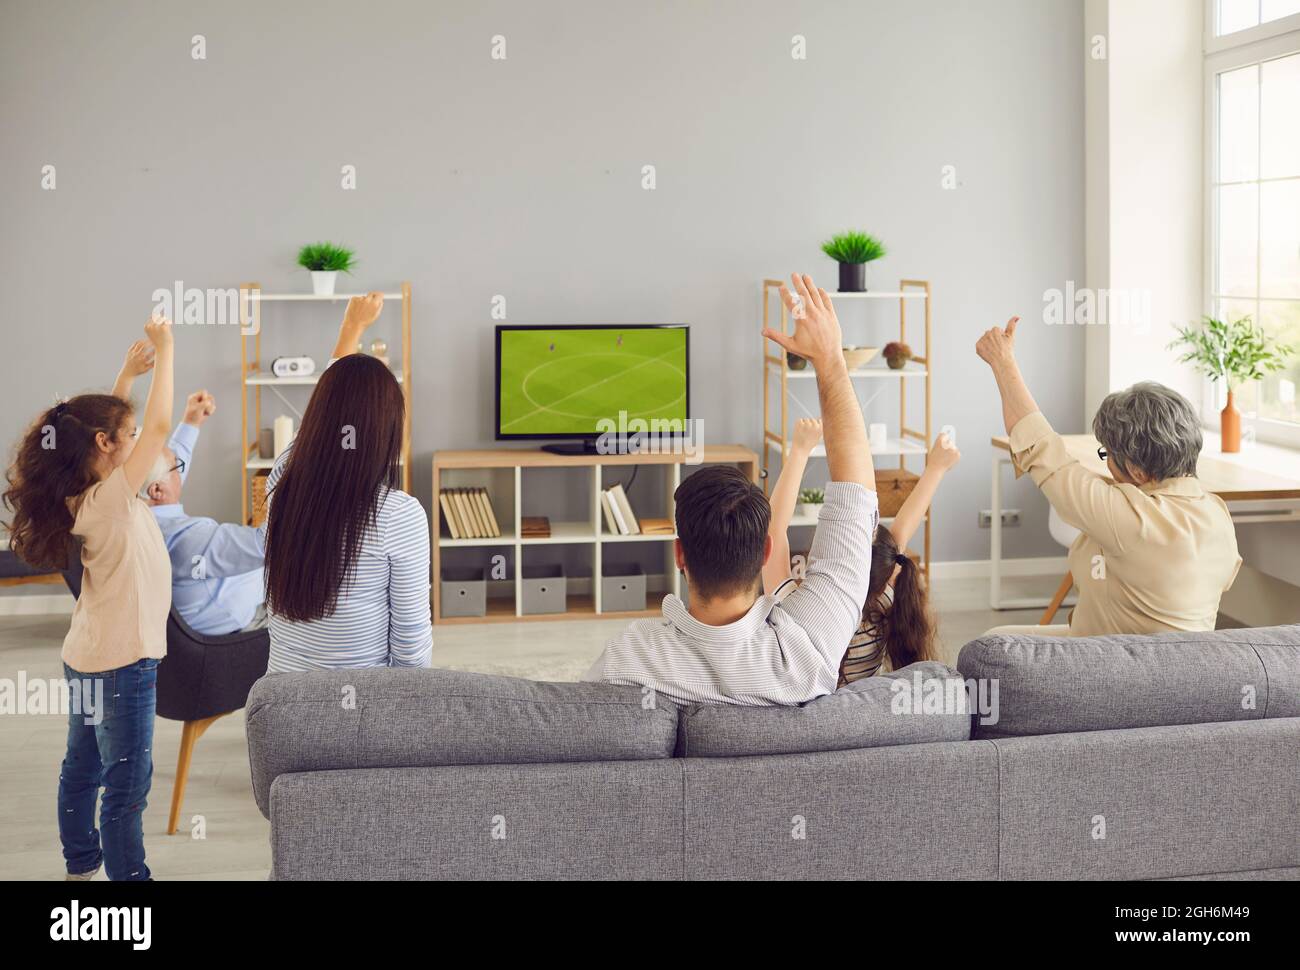 Back view of family sitting on sofa in living room and watching football match on TV Stock Photo